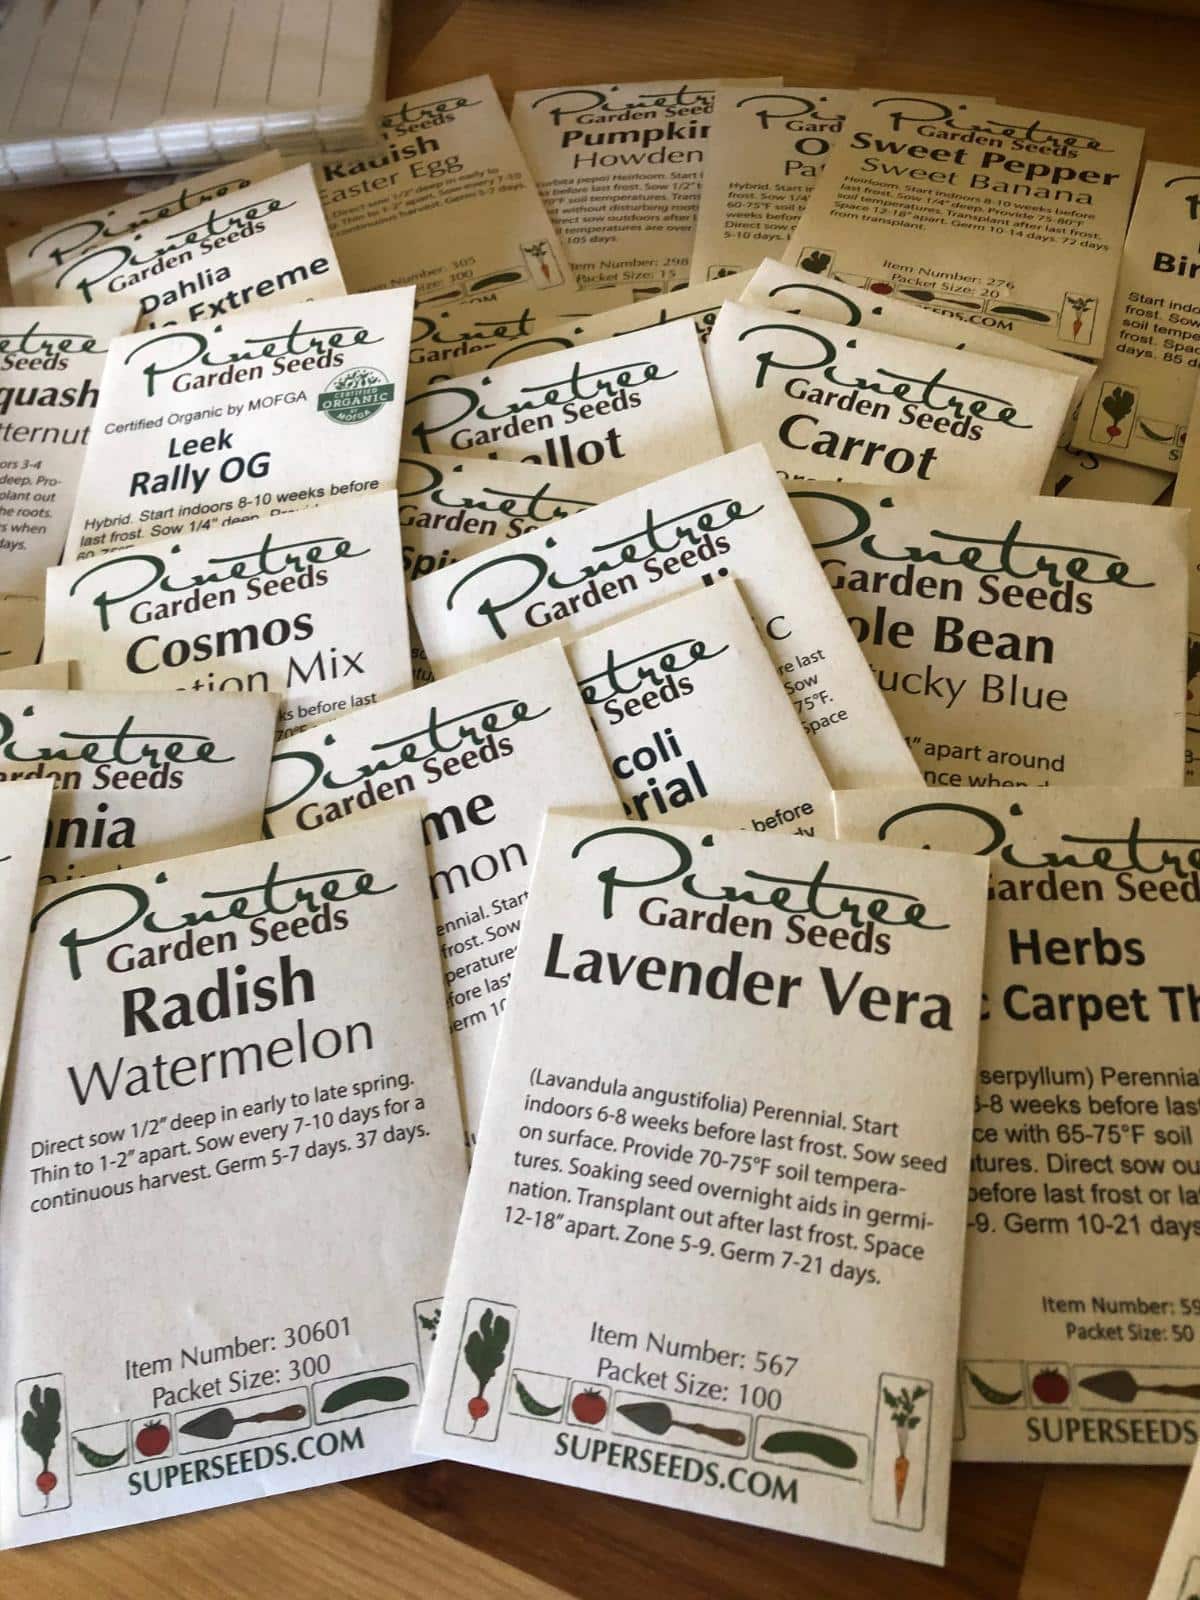 Packets of seeds with instructions listed